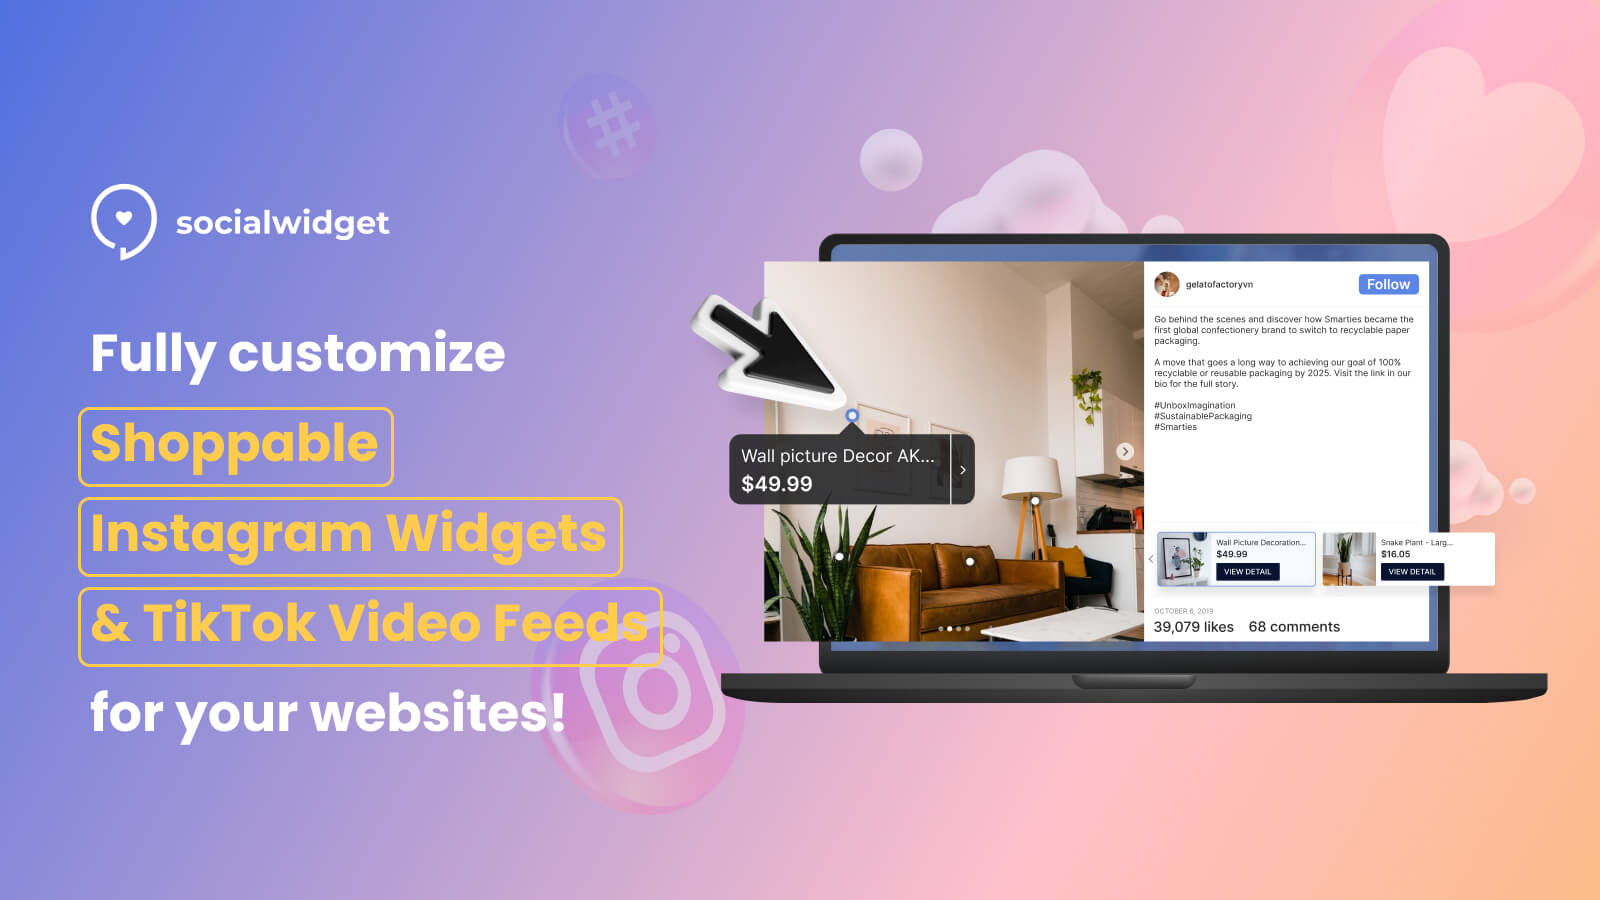 With multiple templates, user-friendly interface and various features in one app, Socialwidget is no doubt one of the best Shopify Instagram apps